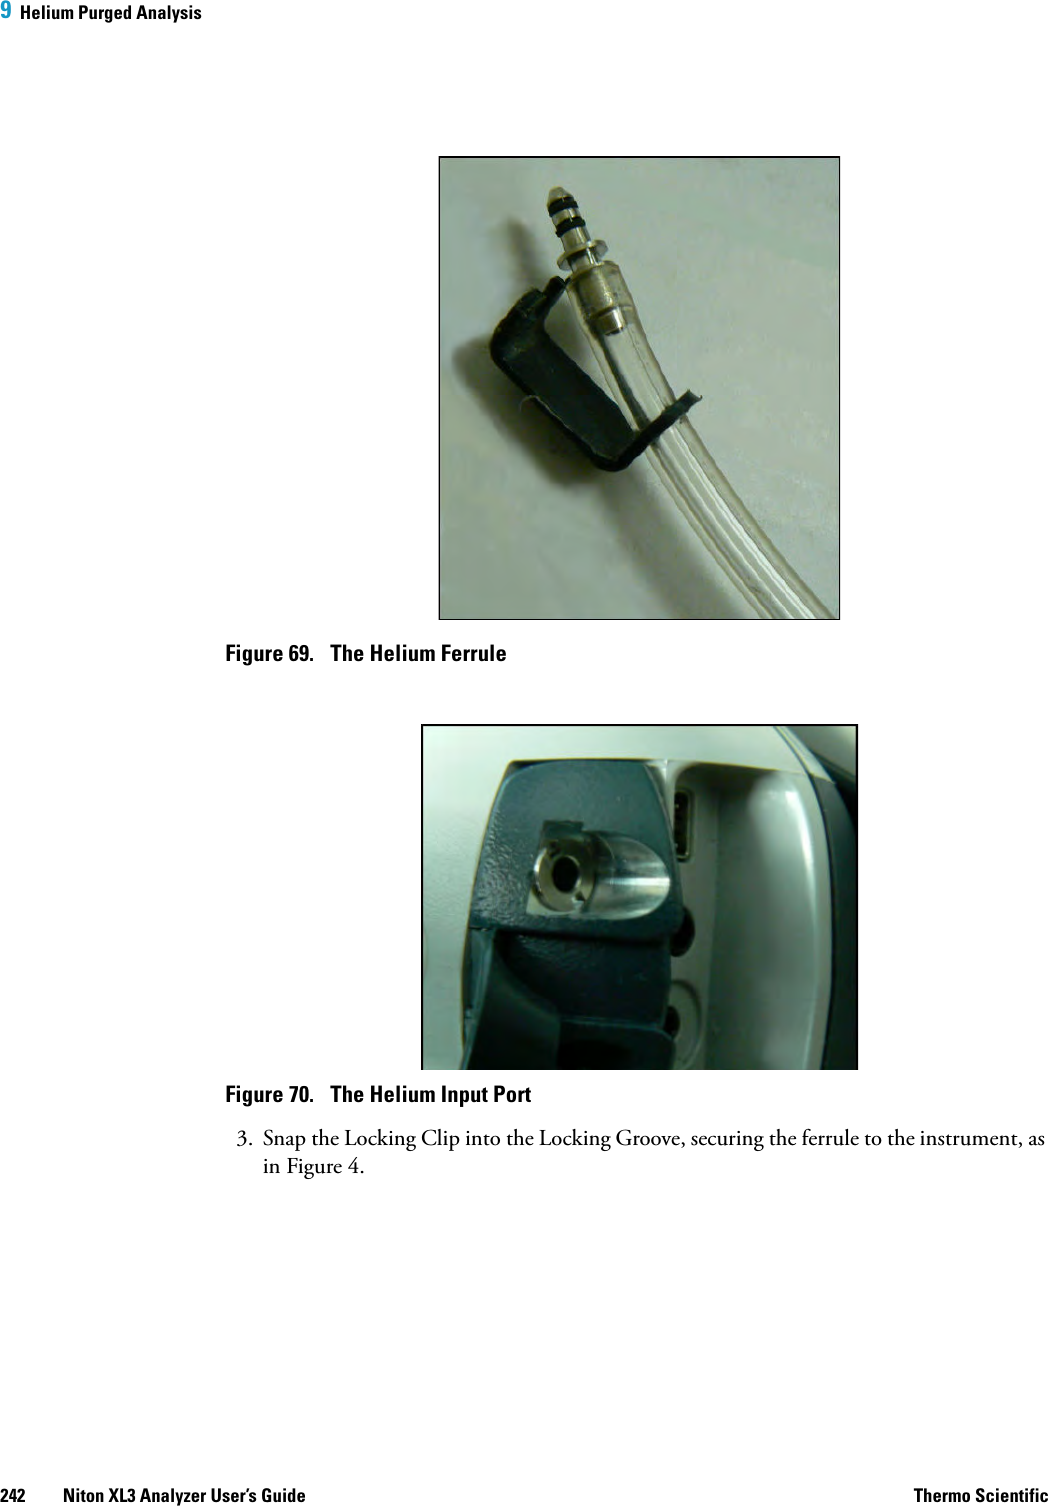 9  Helium Purged Analysis242 Niton XL3 Analyzer User’s Guide Thermo ScientificFigure 69.  The Helium FerruleFigure 70.  The Helium Input Port3. Snap the Locking Clip into the Locking Groove, securing the ferrule to the instrument, as in Figure 4.